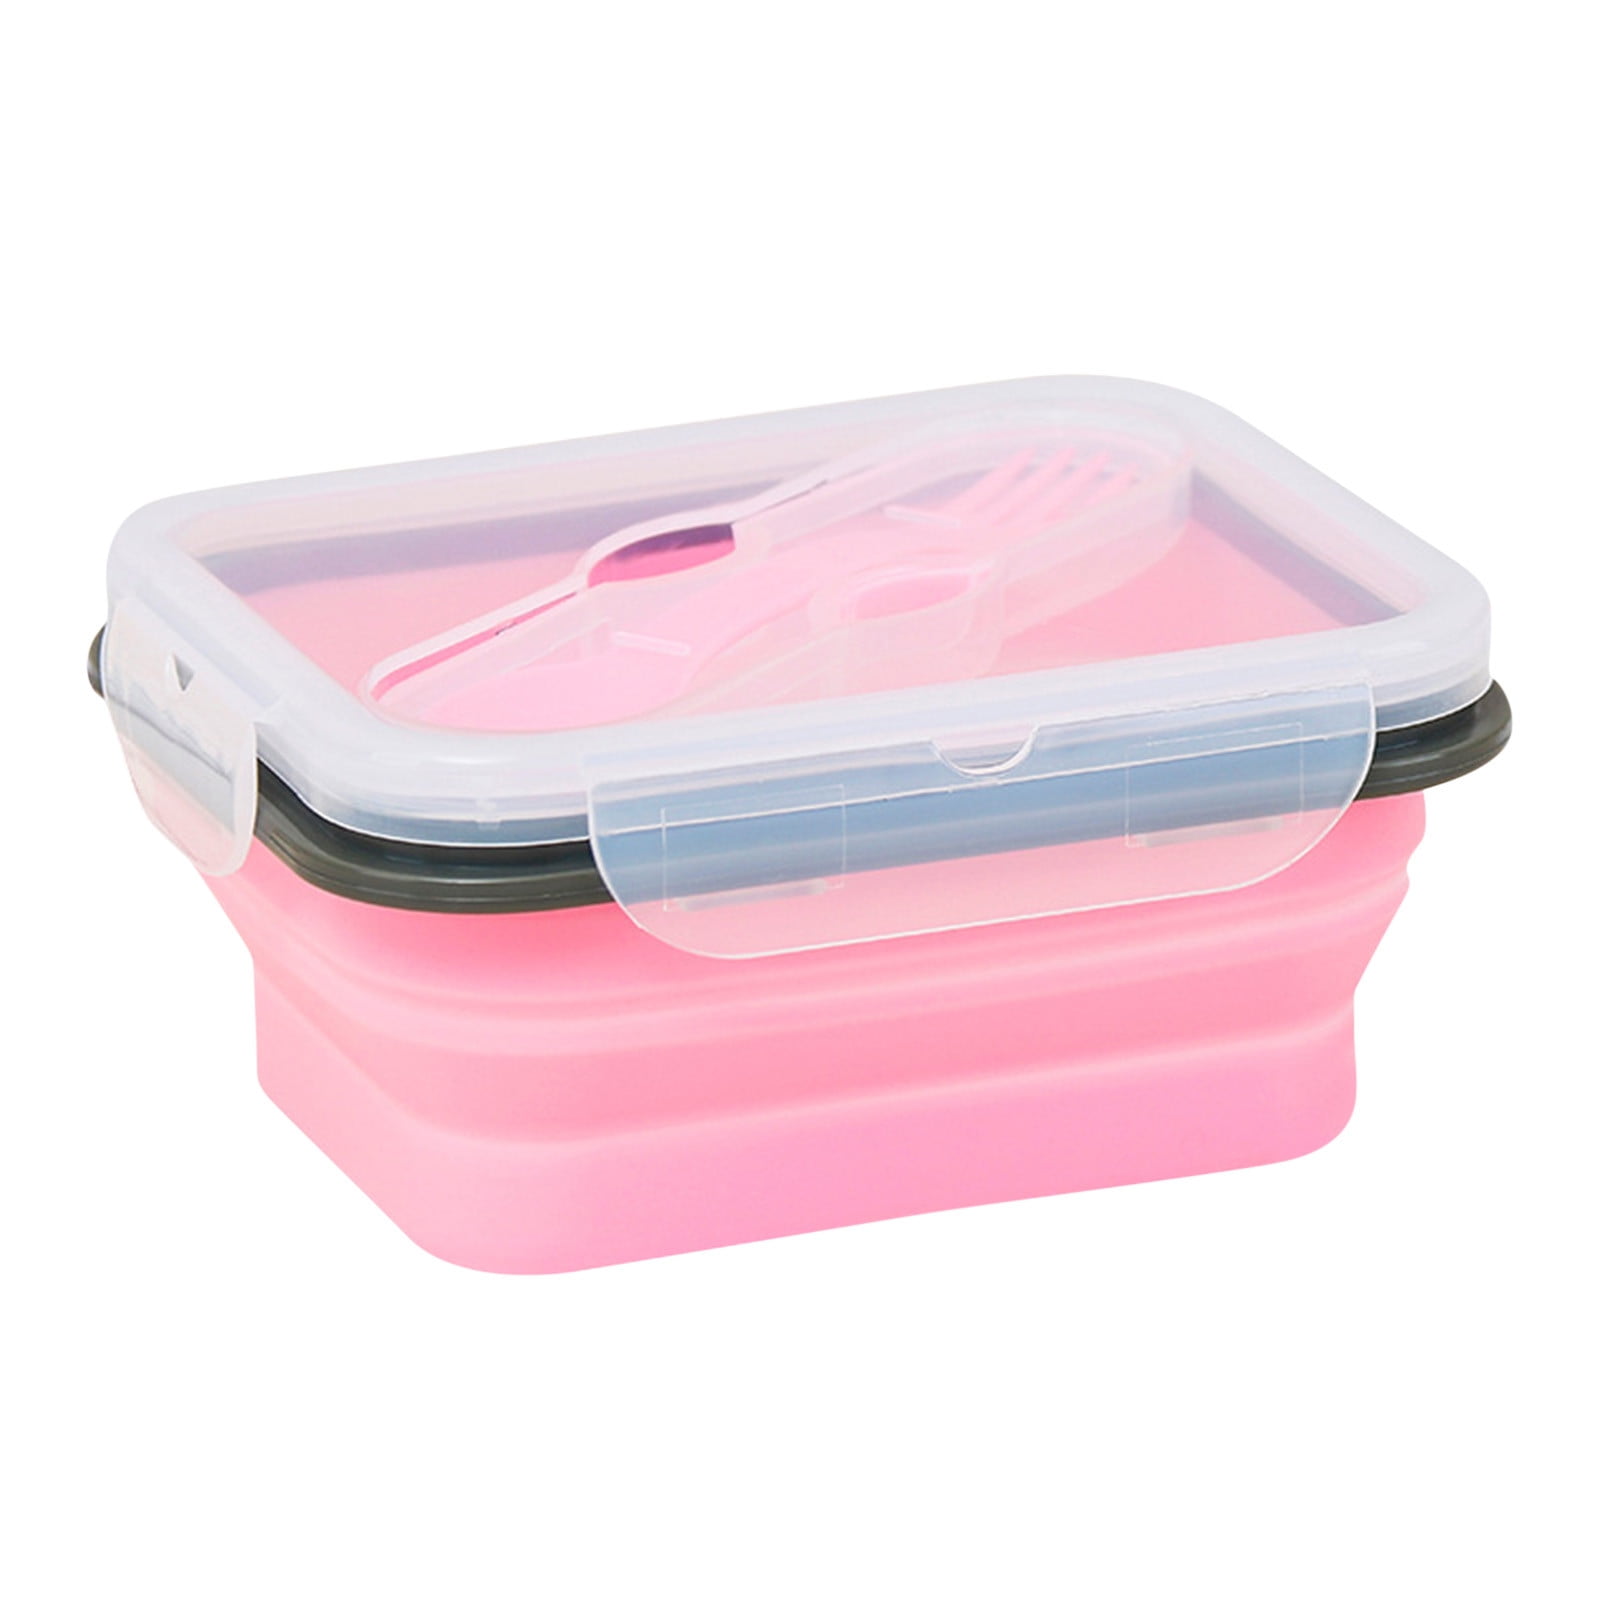 Naughtyhood Take Away Lunch Box Hot Container With Handle, 1000ml Stainless  Steel Food Heating Container, Food Container, Keep Warm Container